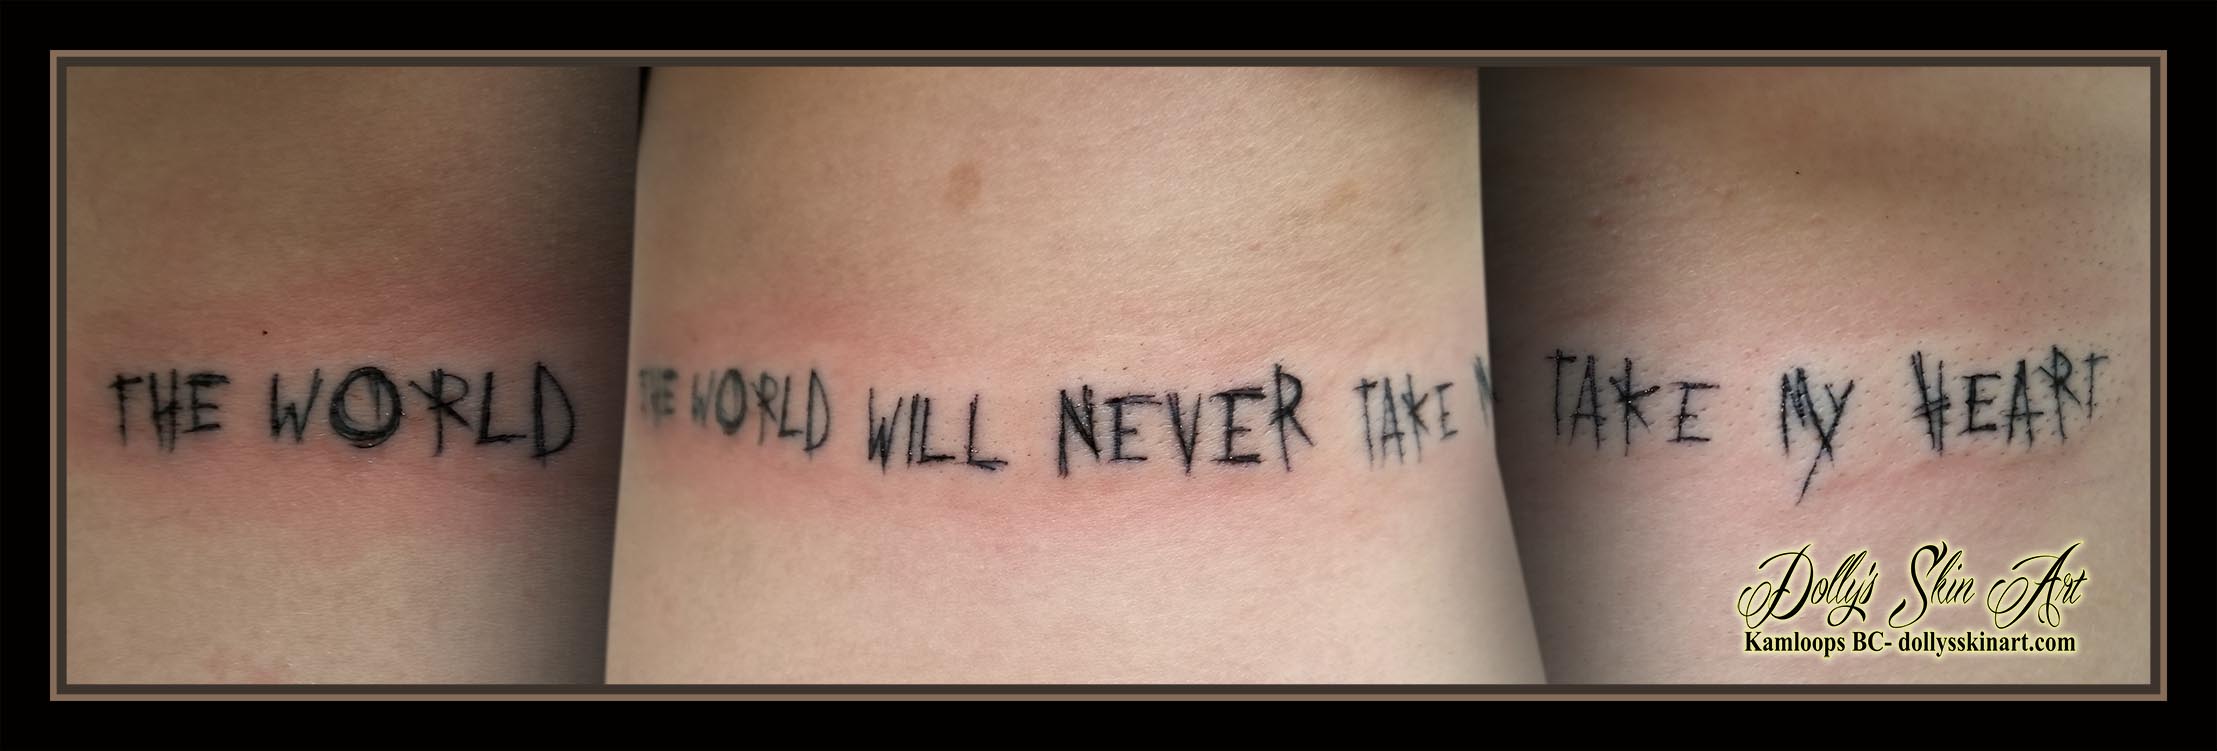 the world will never take my heart lettering font scratch carved scratchy black tattoo kamloops dolly's skin art